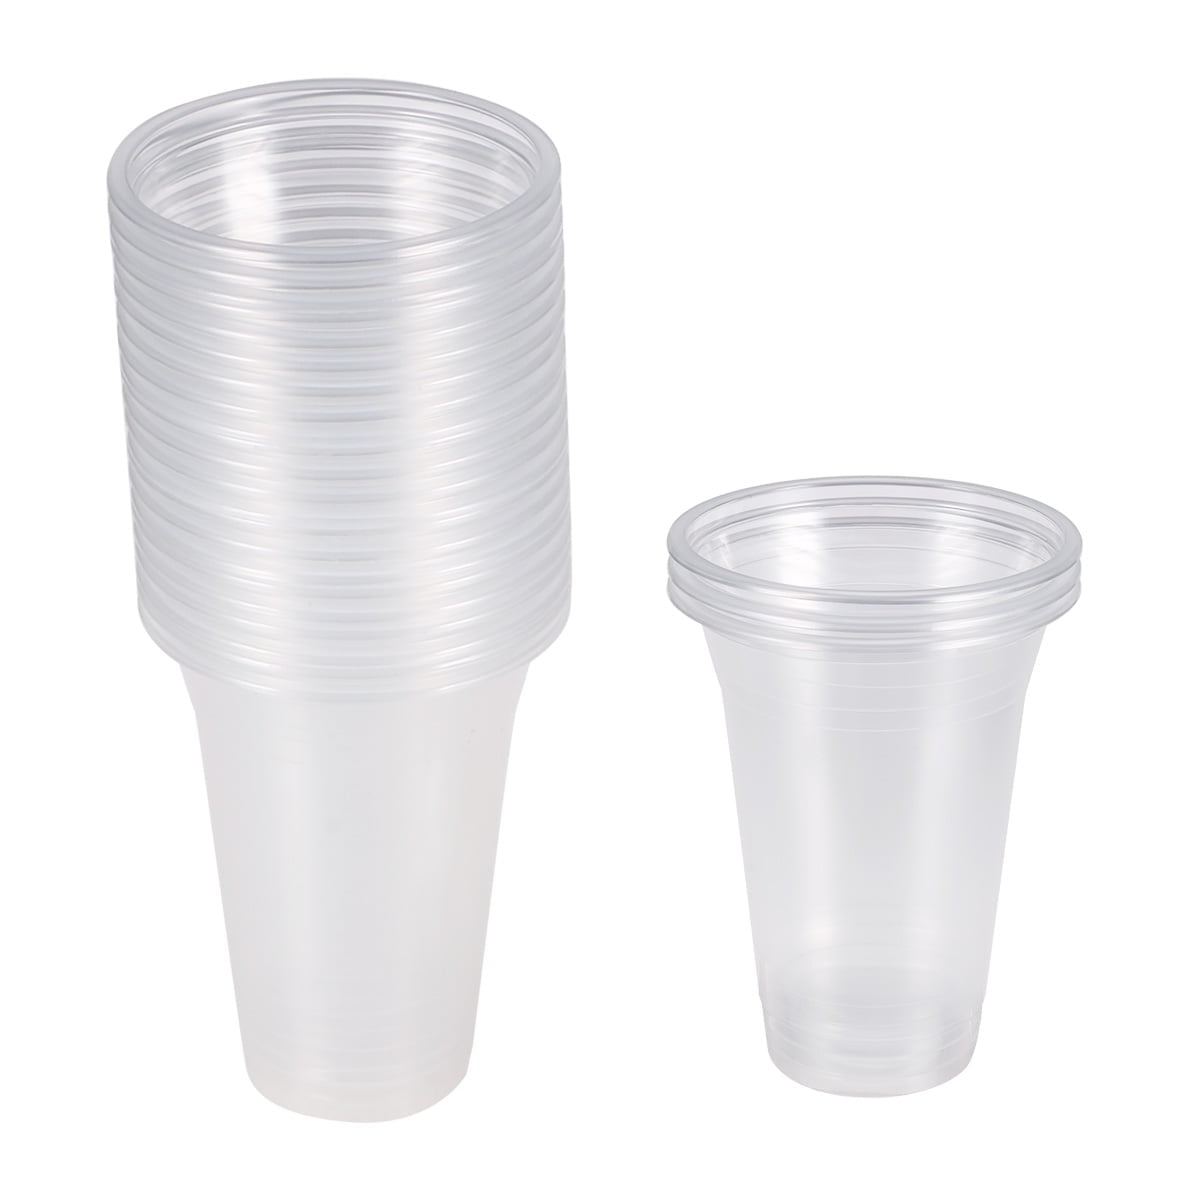 HEMOTON 15pcs Colorful Plastic Cups Home Beverage Drinking Cup Reusable  Holiday Party Tableware and Party Supplies 101-200ml